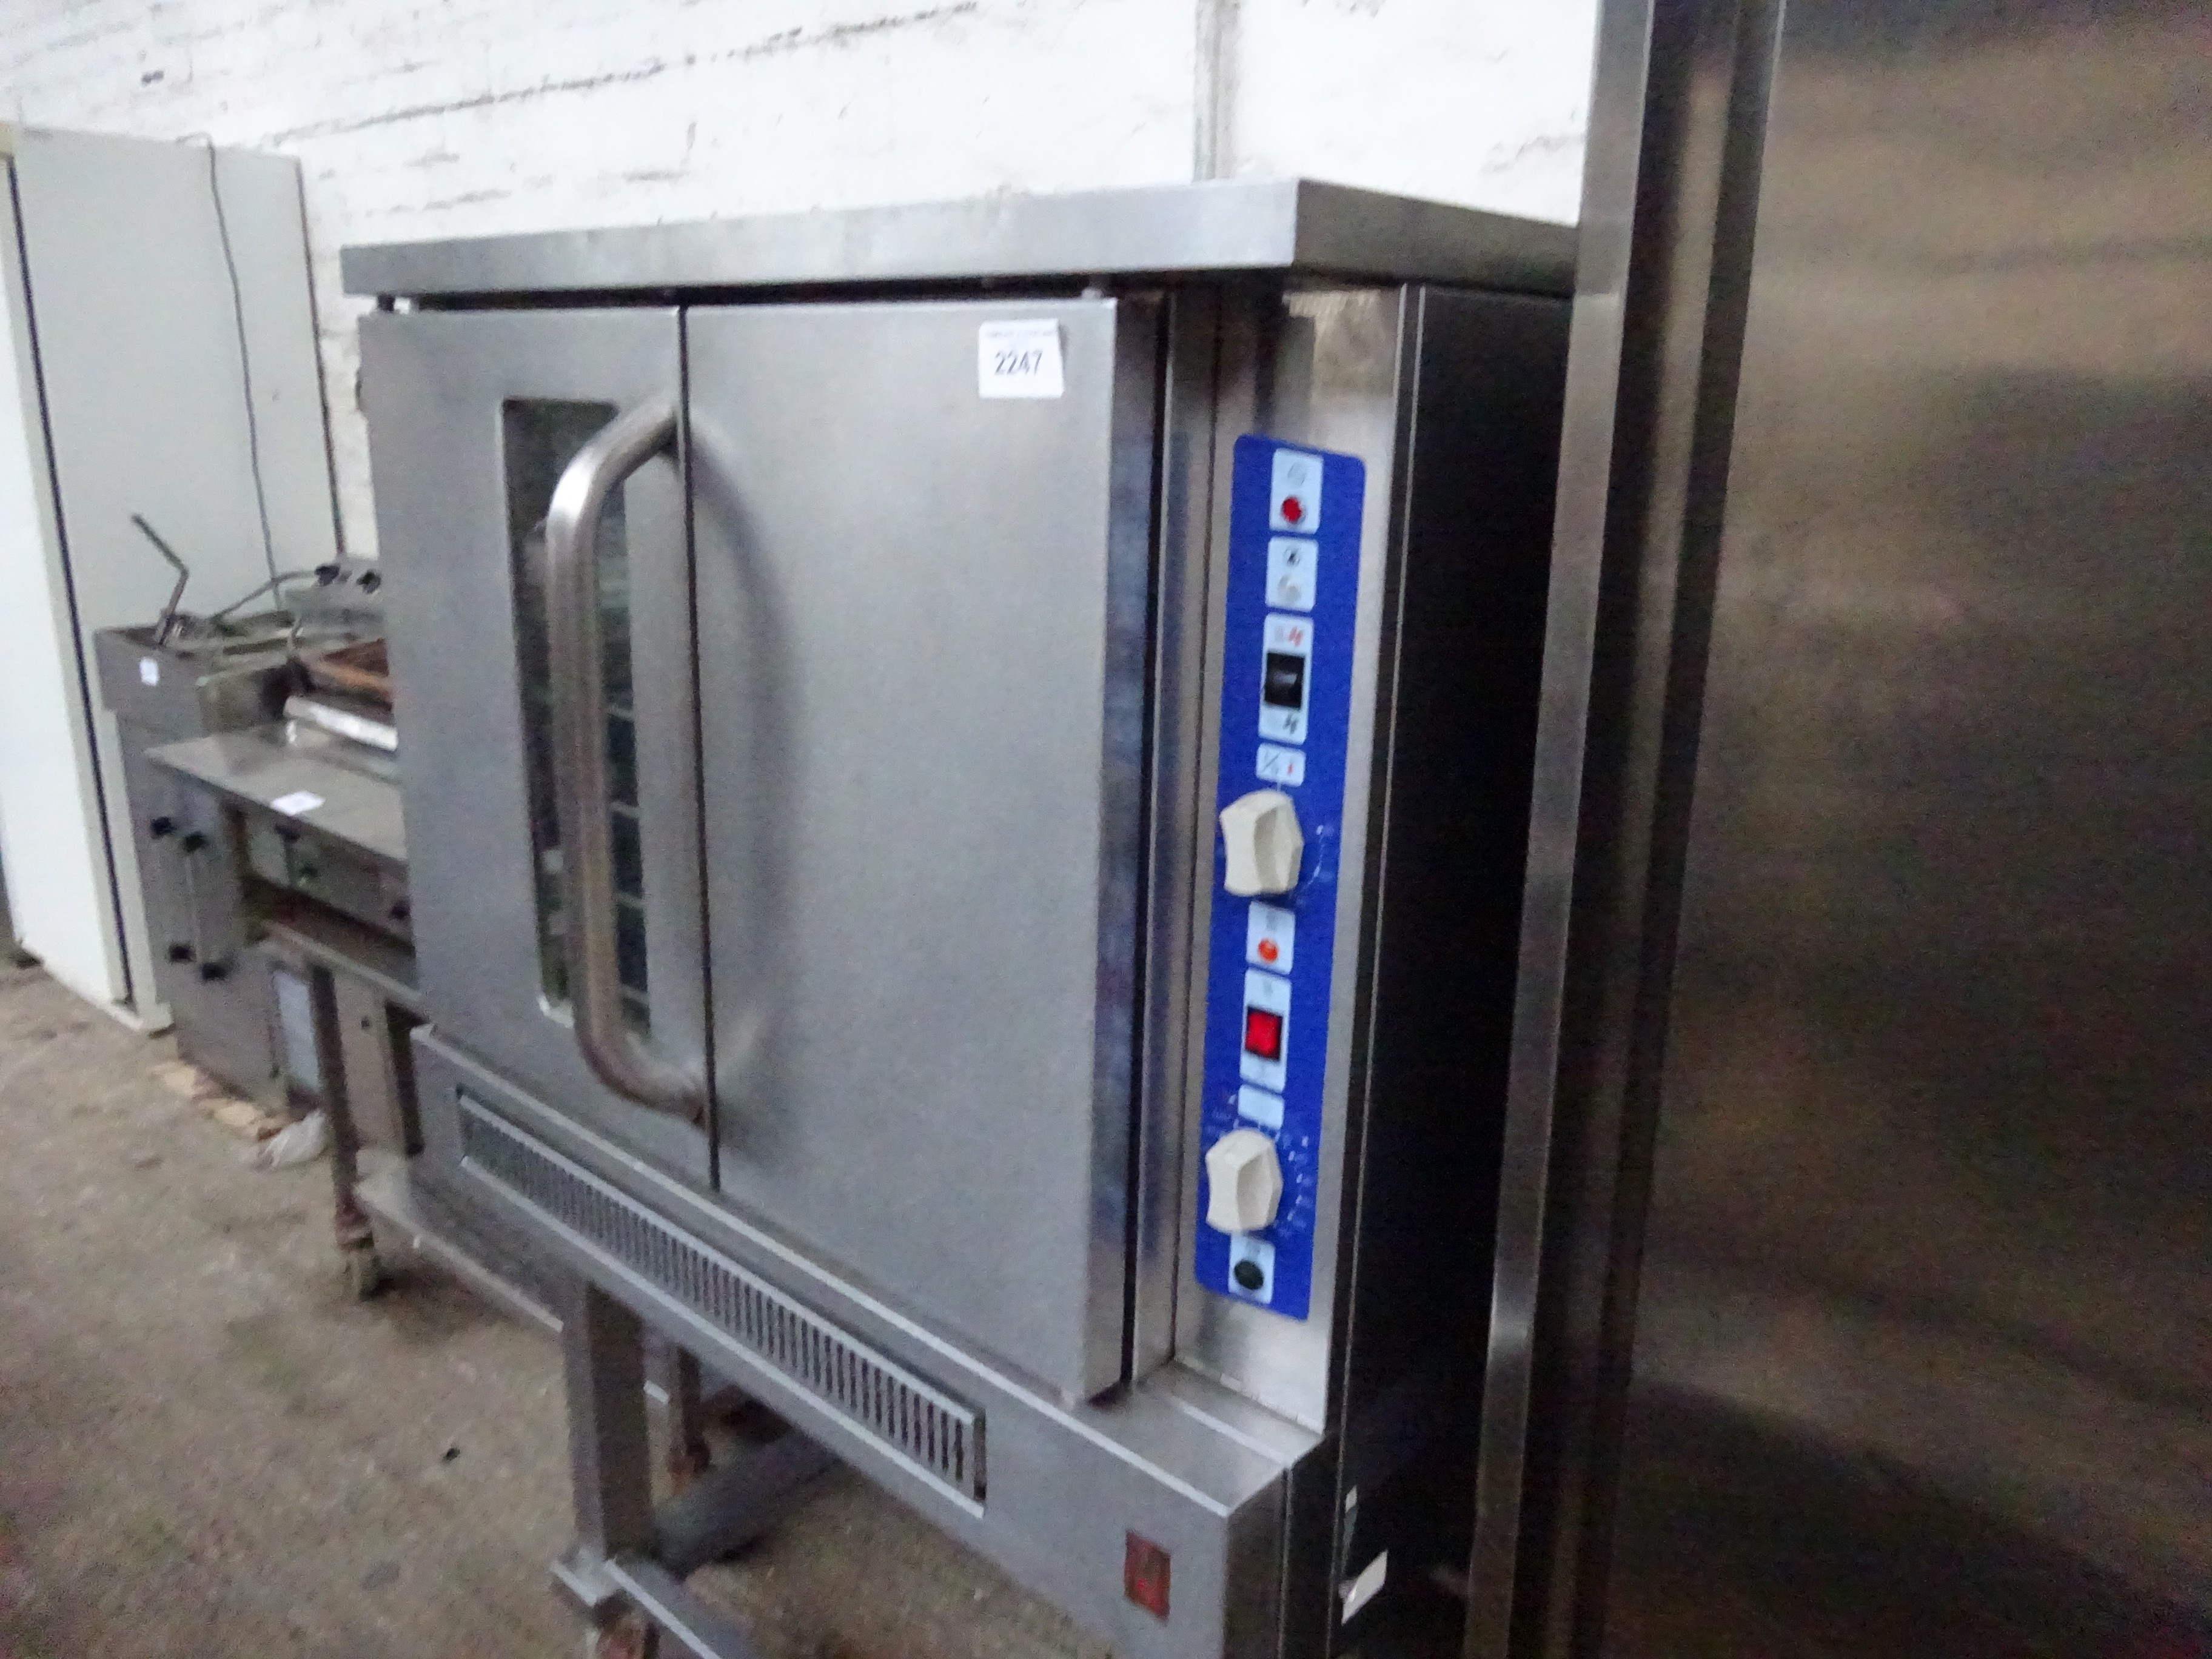 Falcon natural gas convection oven on mobile stand.